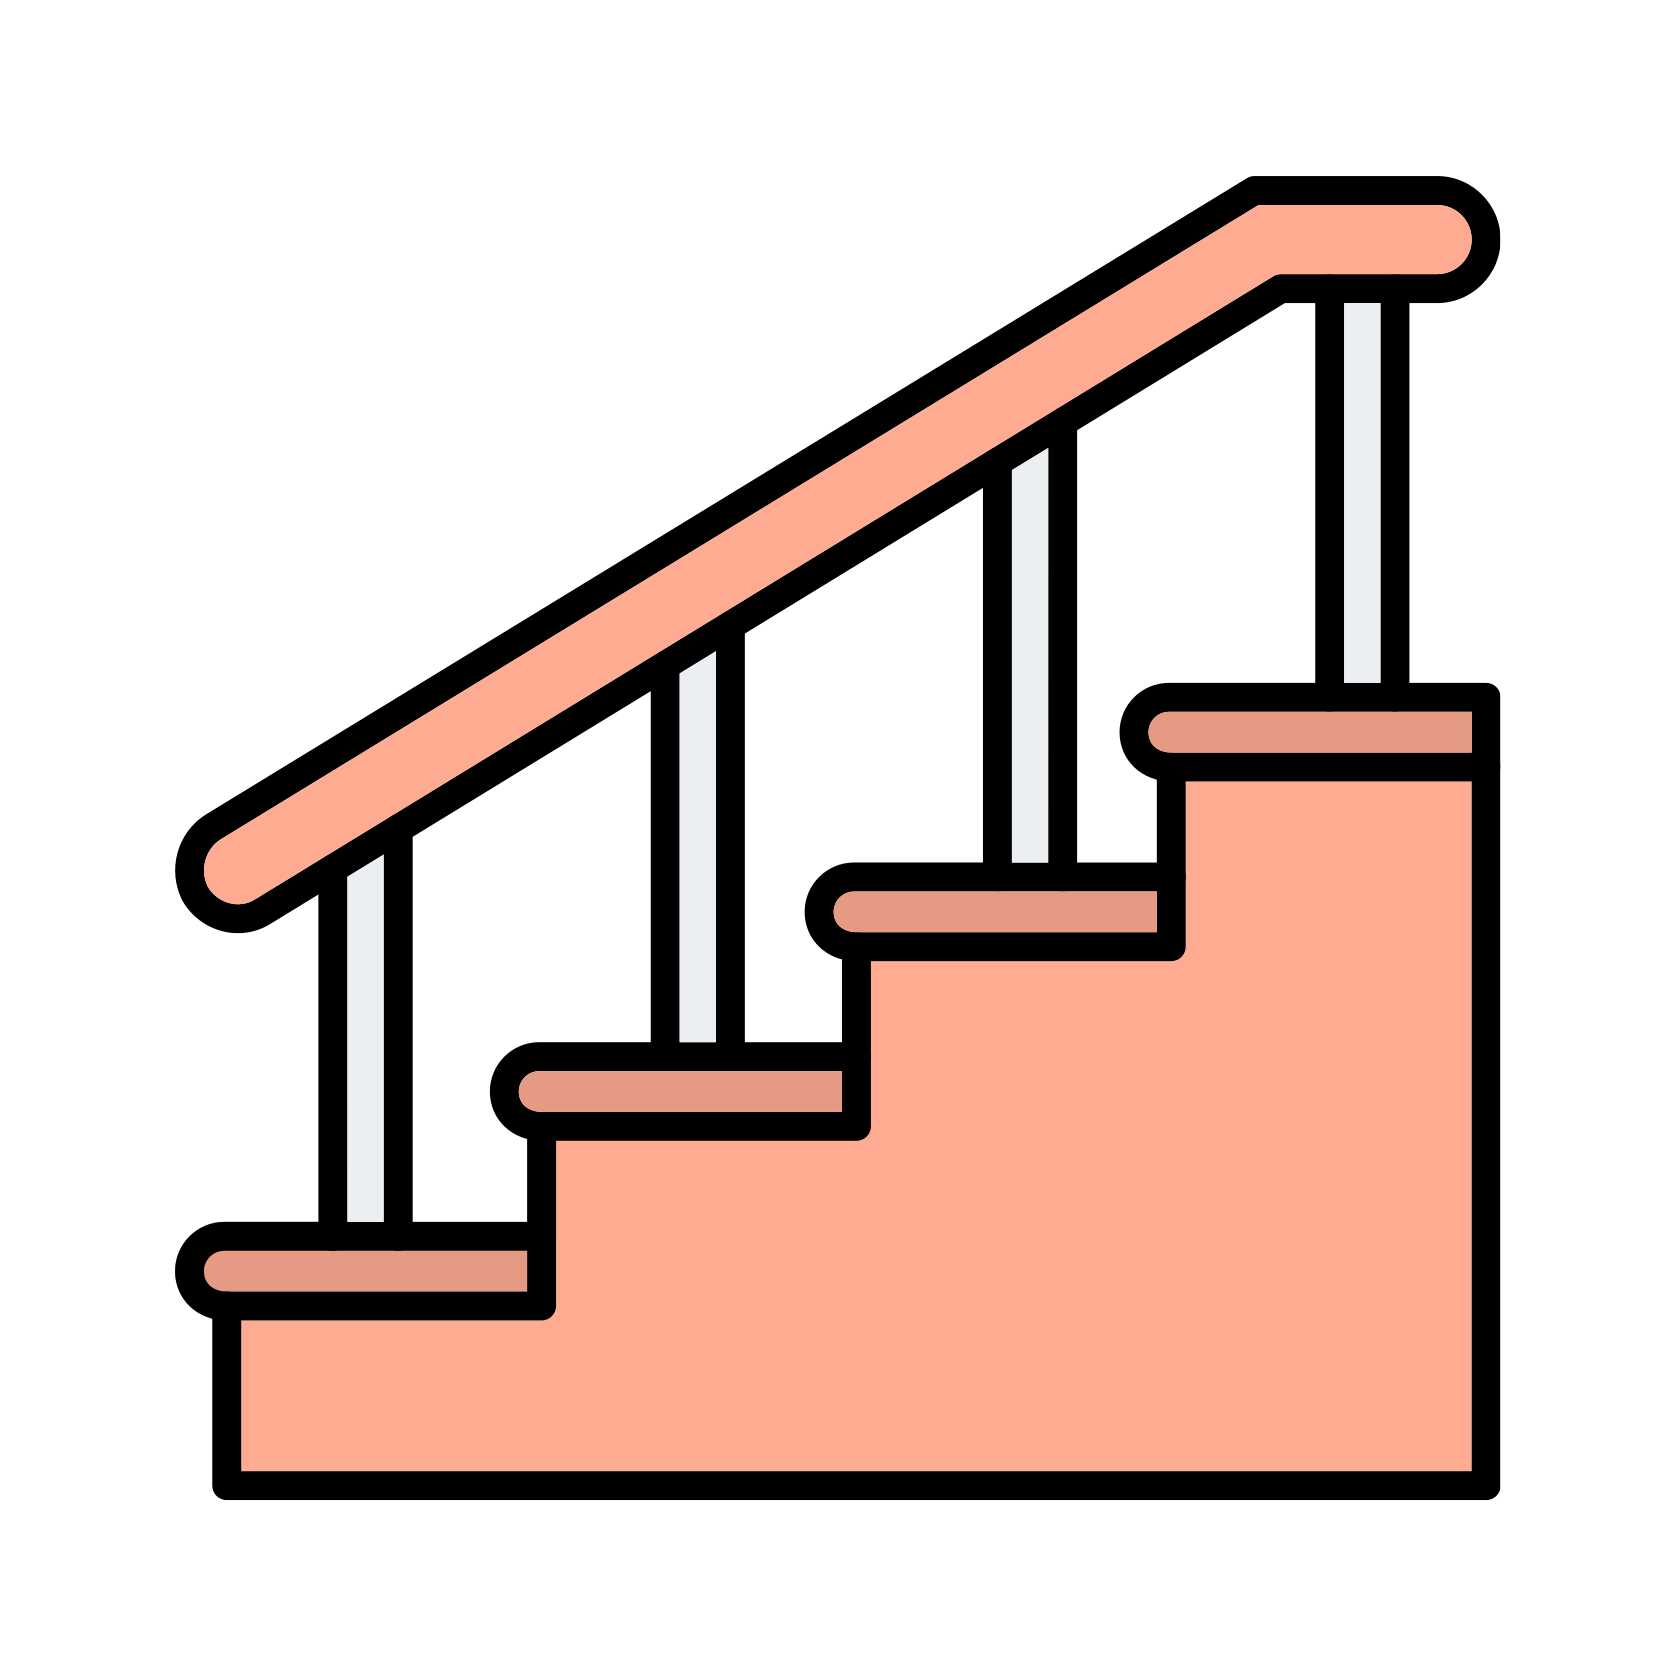 English vocabulary with pictures - Parts of a house - Stairs